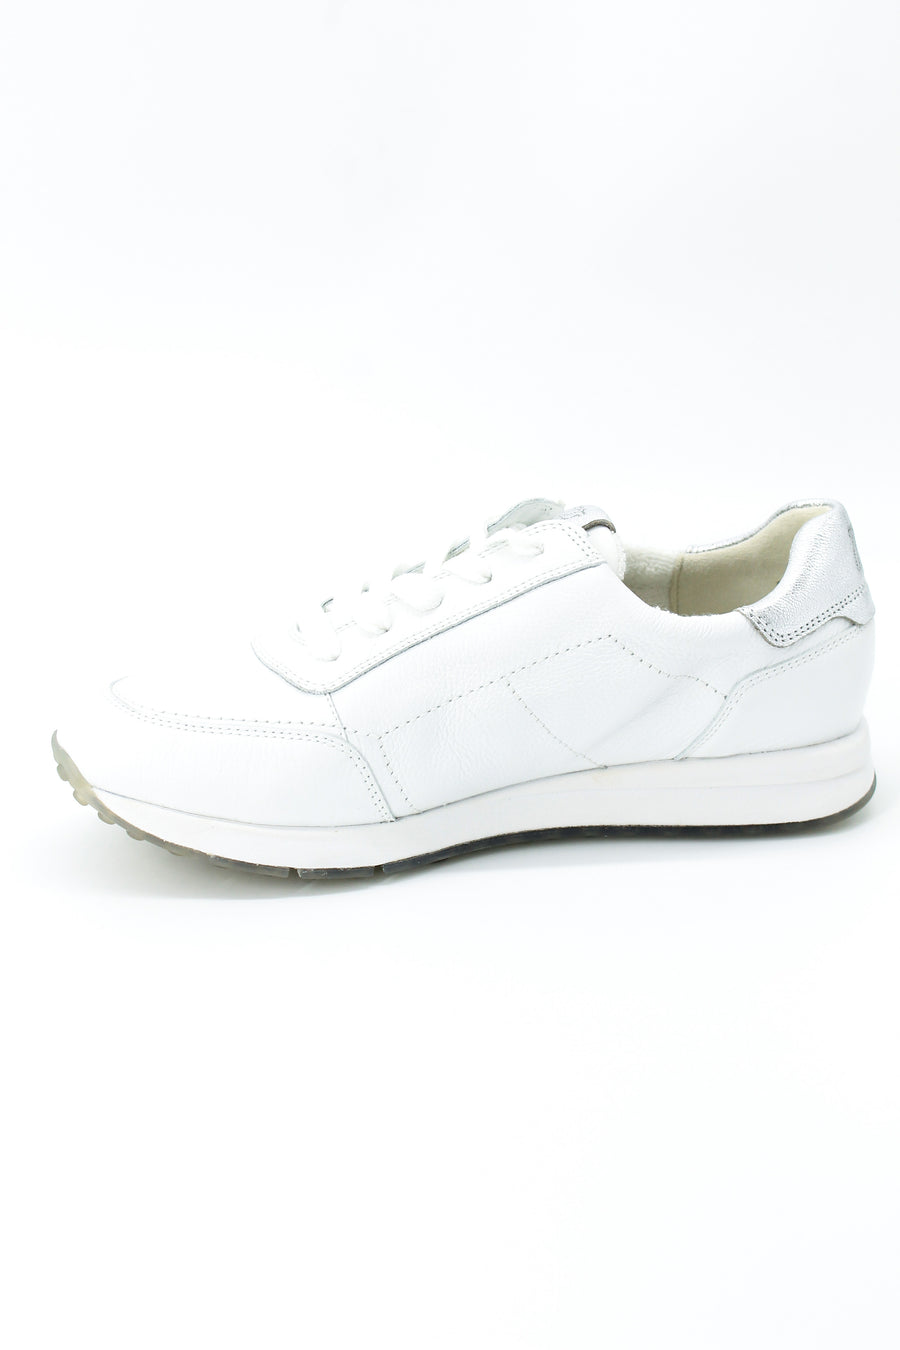 Paul Green 4085-233 White and Silver